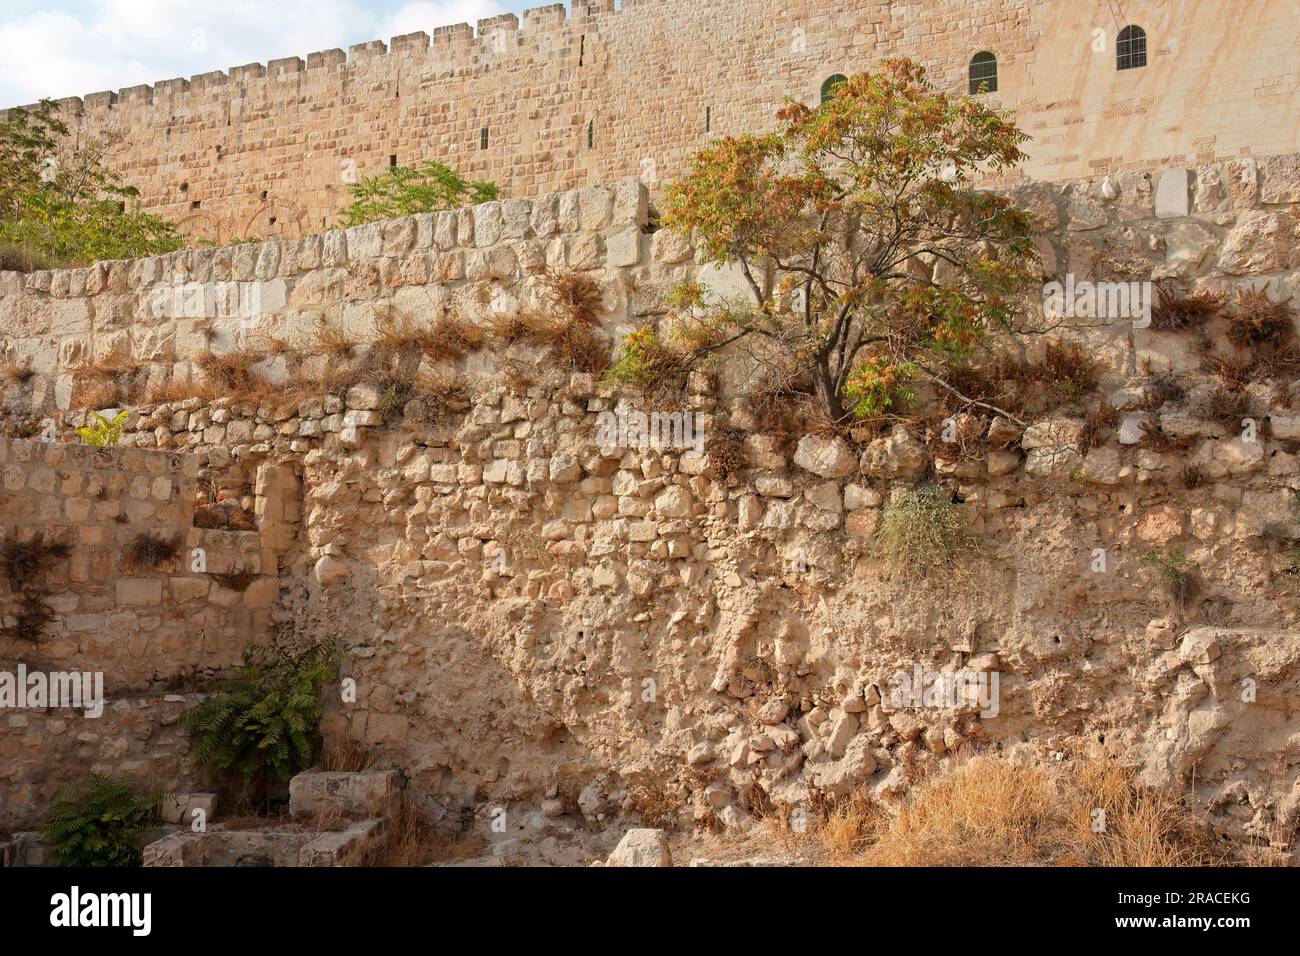 Architectural detail of a section of the ancient wall of Jerusalem, Israel Stock Photo